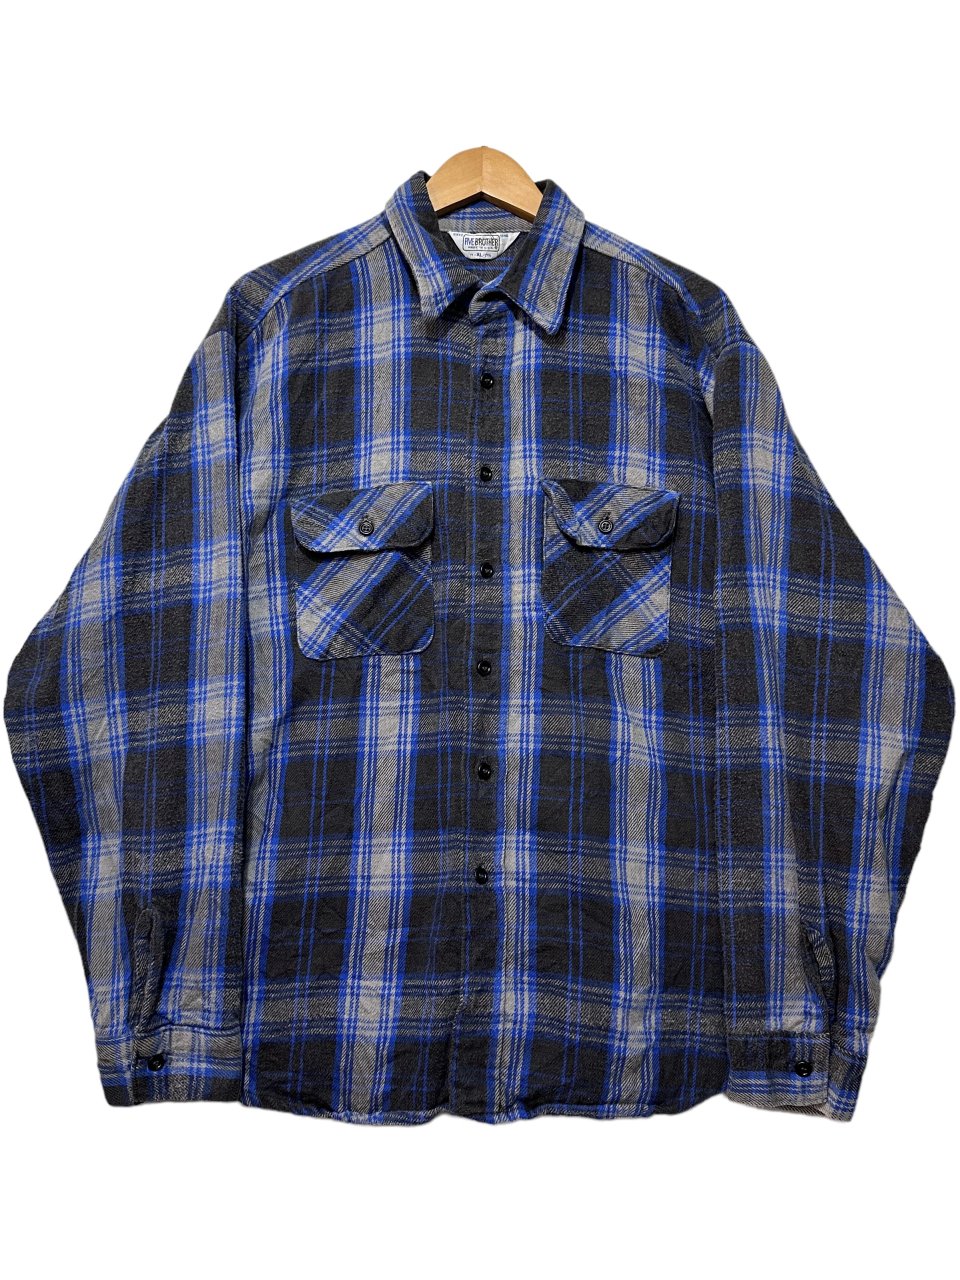 USA製 70s~80s FIVE BROTHER Check Flannel L/S Shirt 青黒灰 XL